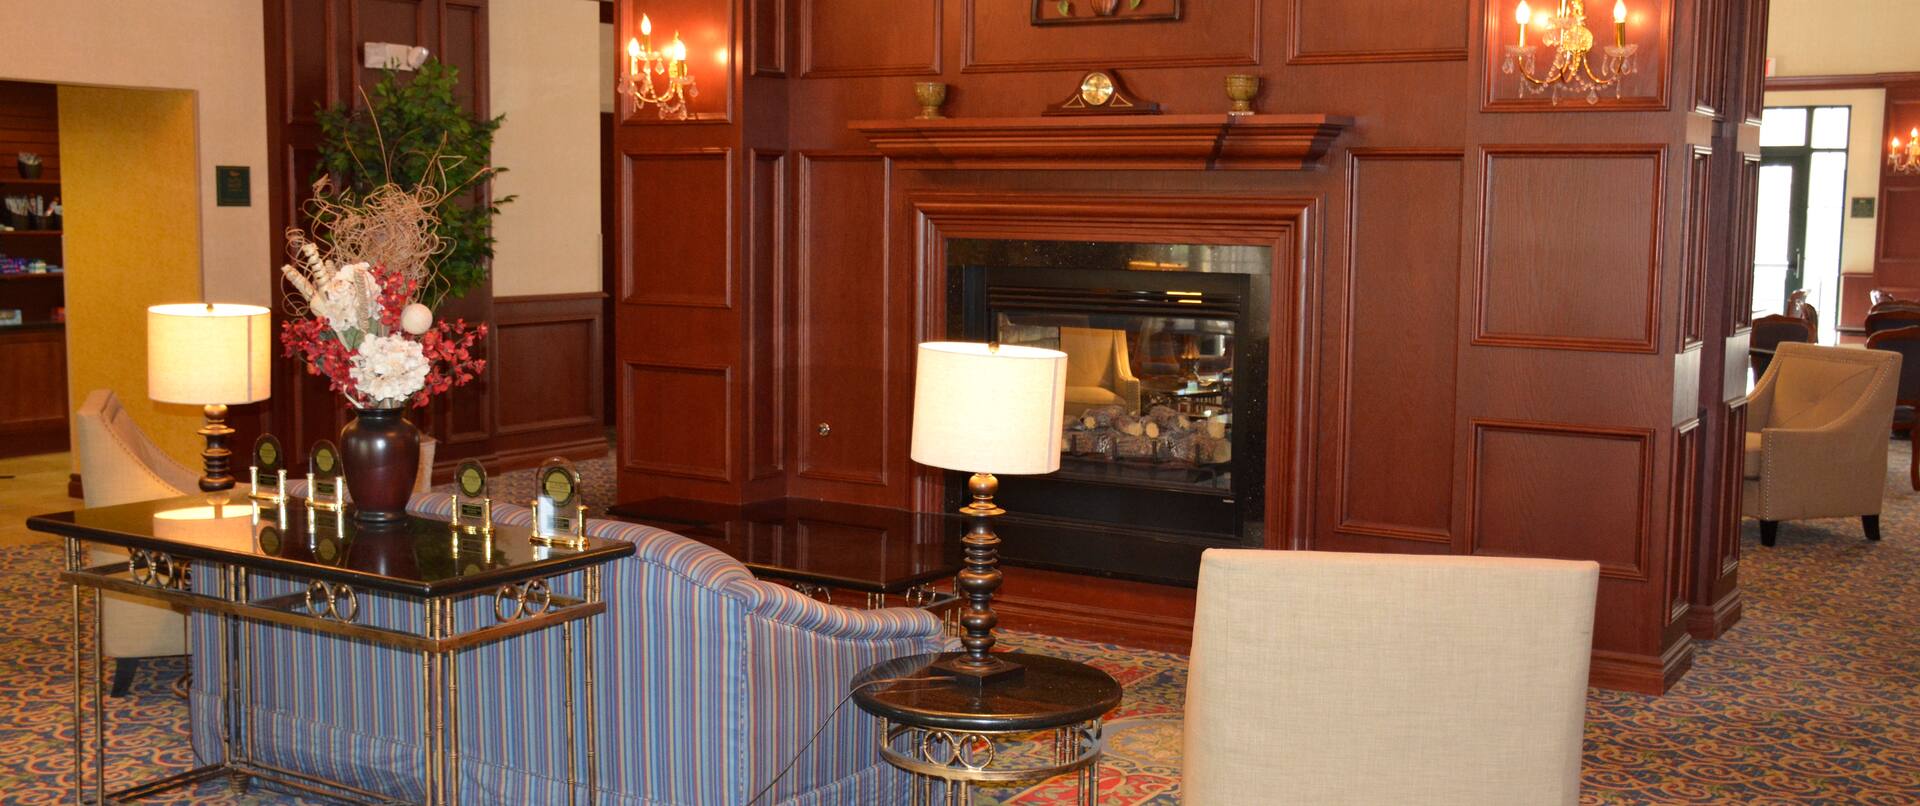 Two Armchairs, Sofa, and Tables With Illuminated Lamps Around Fireplace in Lobby Lounge Area